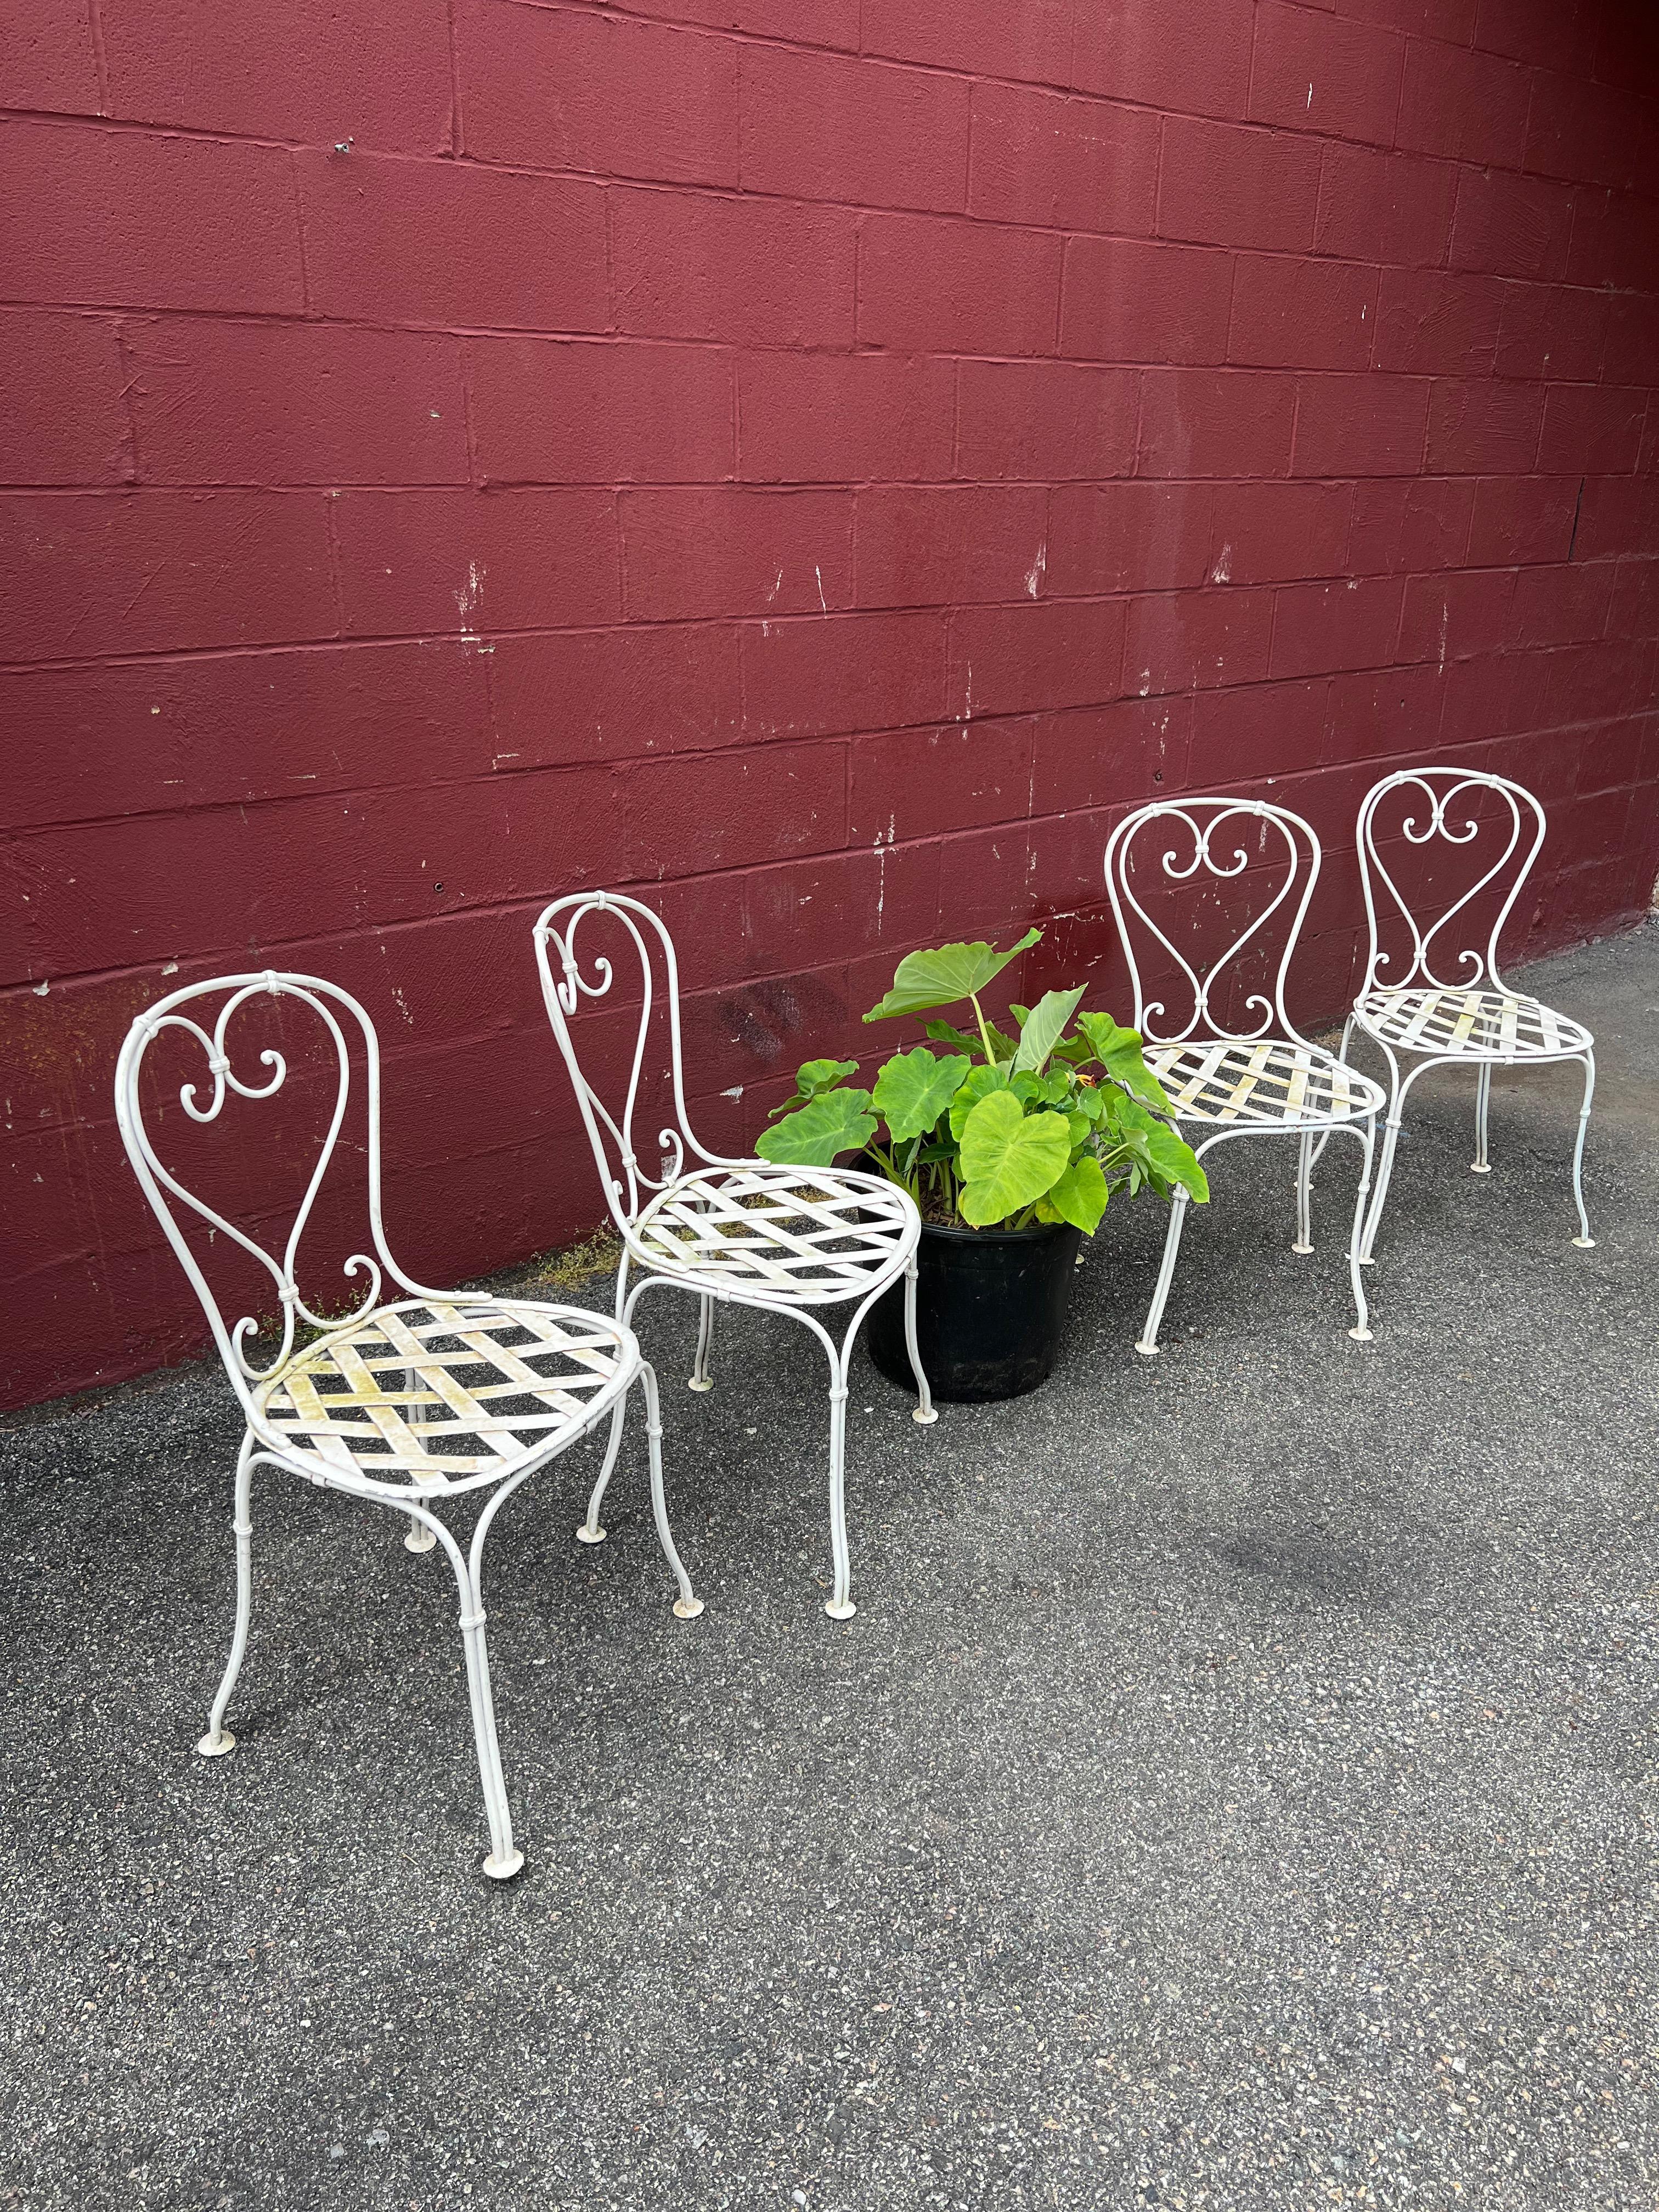 This set of four beautiful French garden chairs will be an elegant addition to any outdoor seating area or garden. The chairs are constructed from white-painted iron, and feature decorative scroll detail in the backs along with intricate